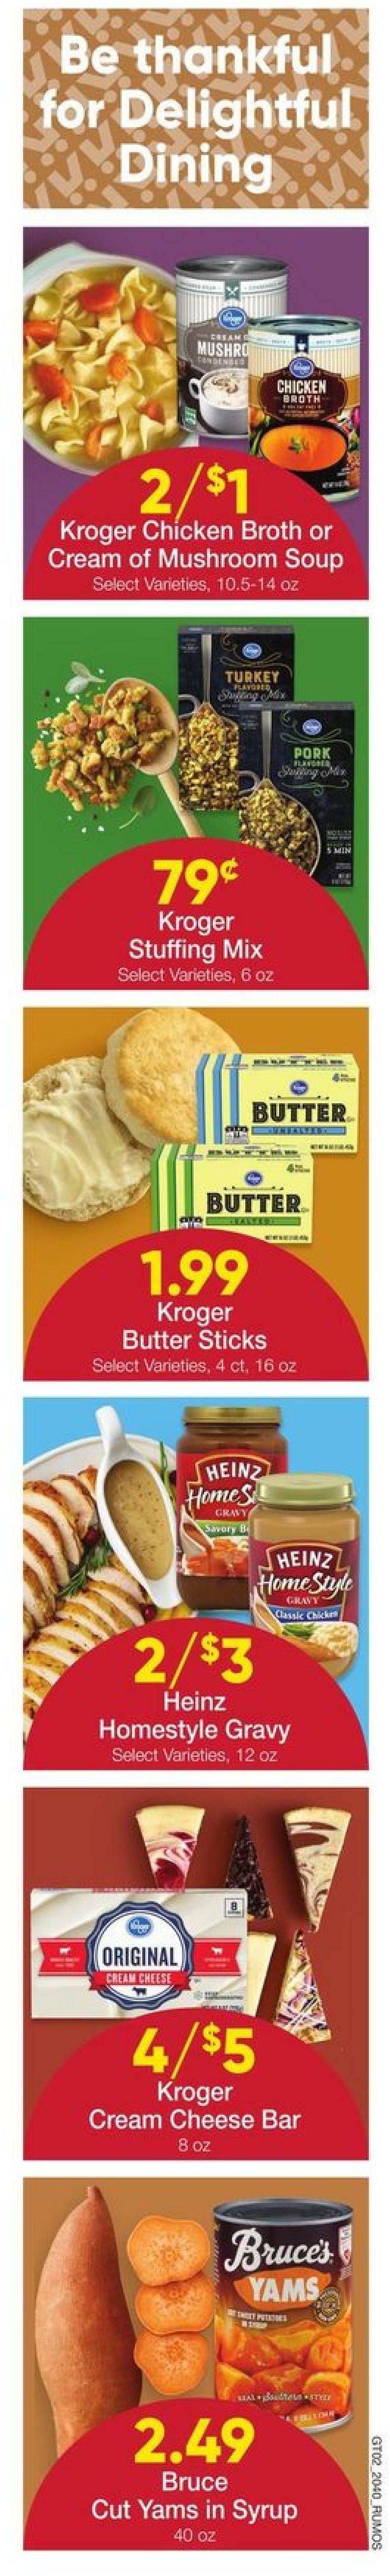 Ruler Foods Weekly Ad from November 4